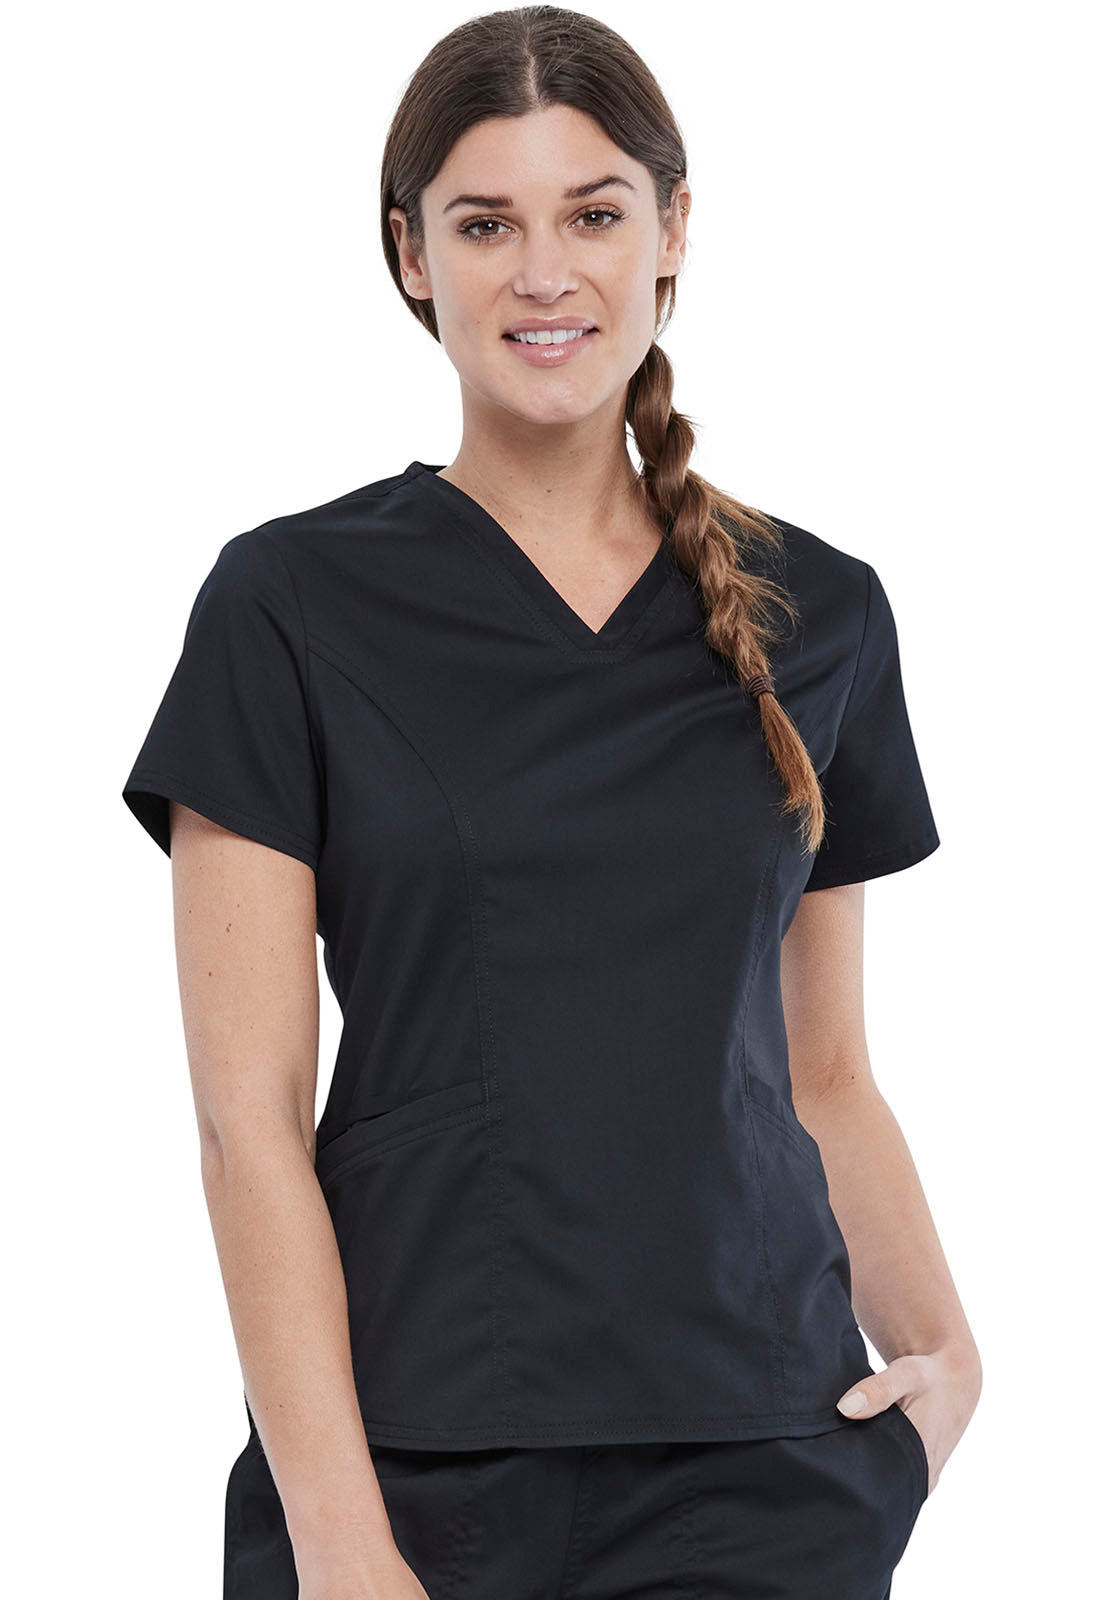 Fit Right Medical Scrubs Reviews and Testimonials